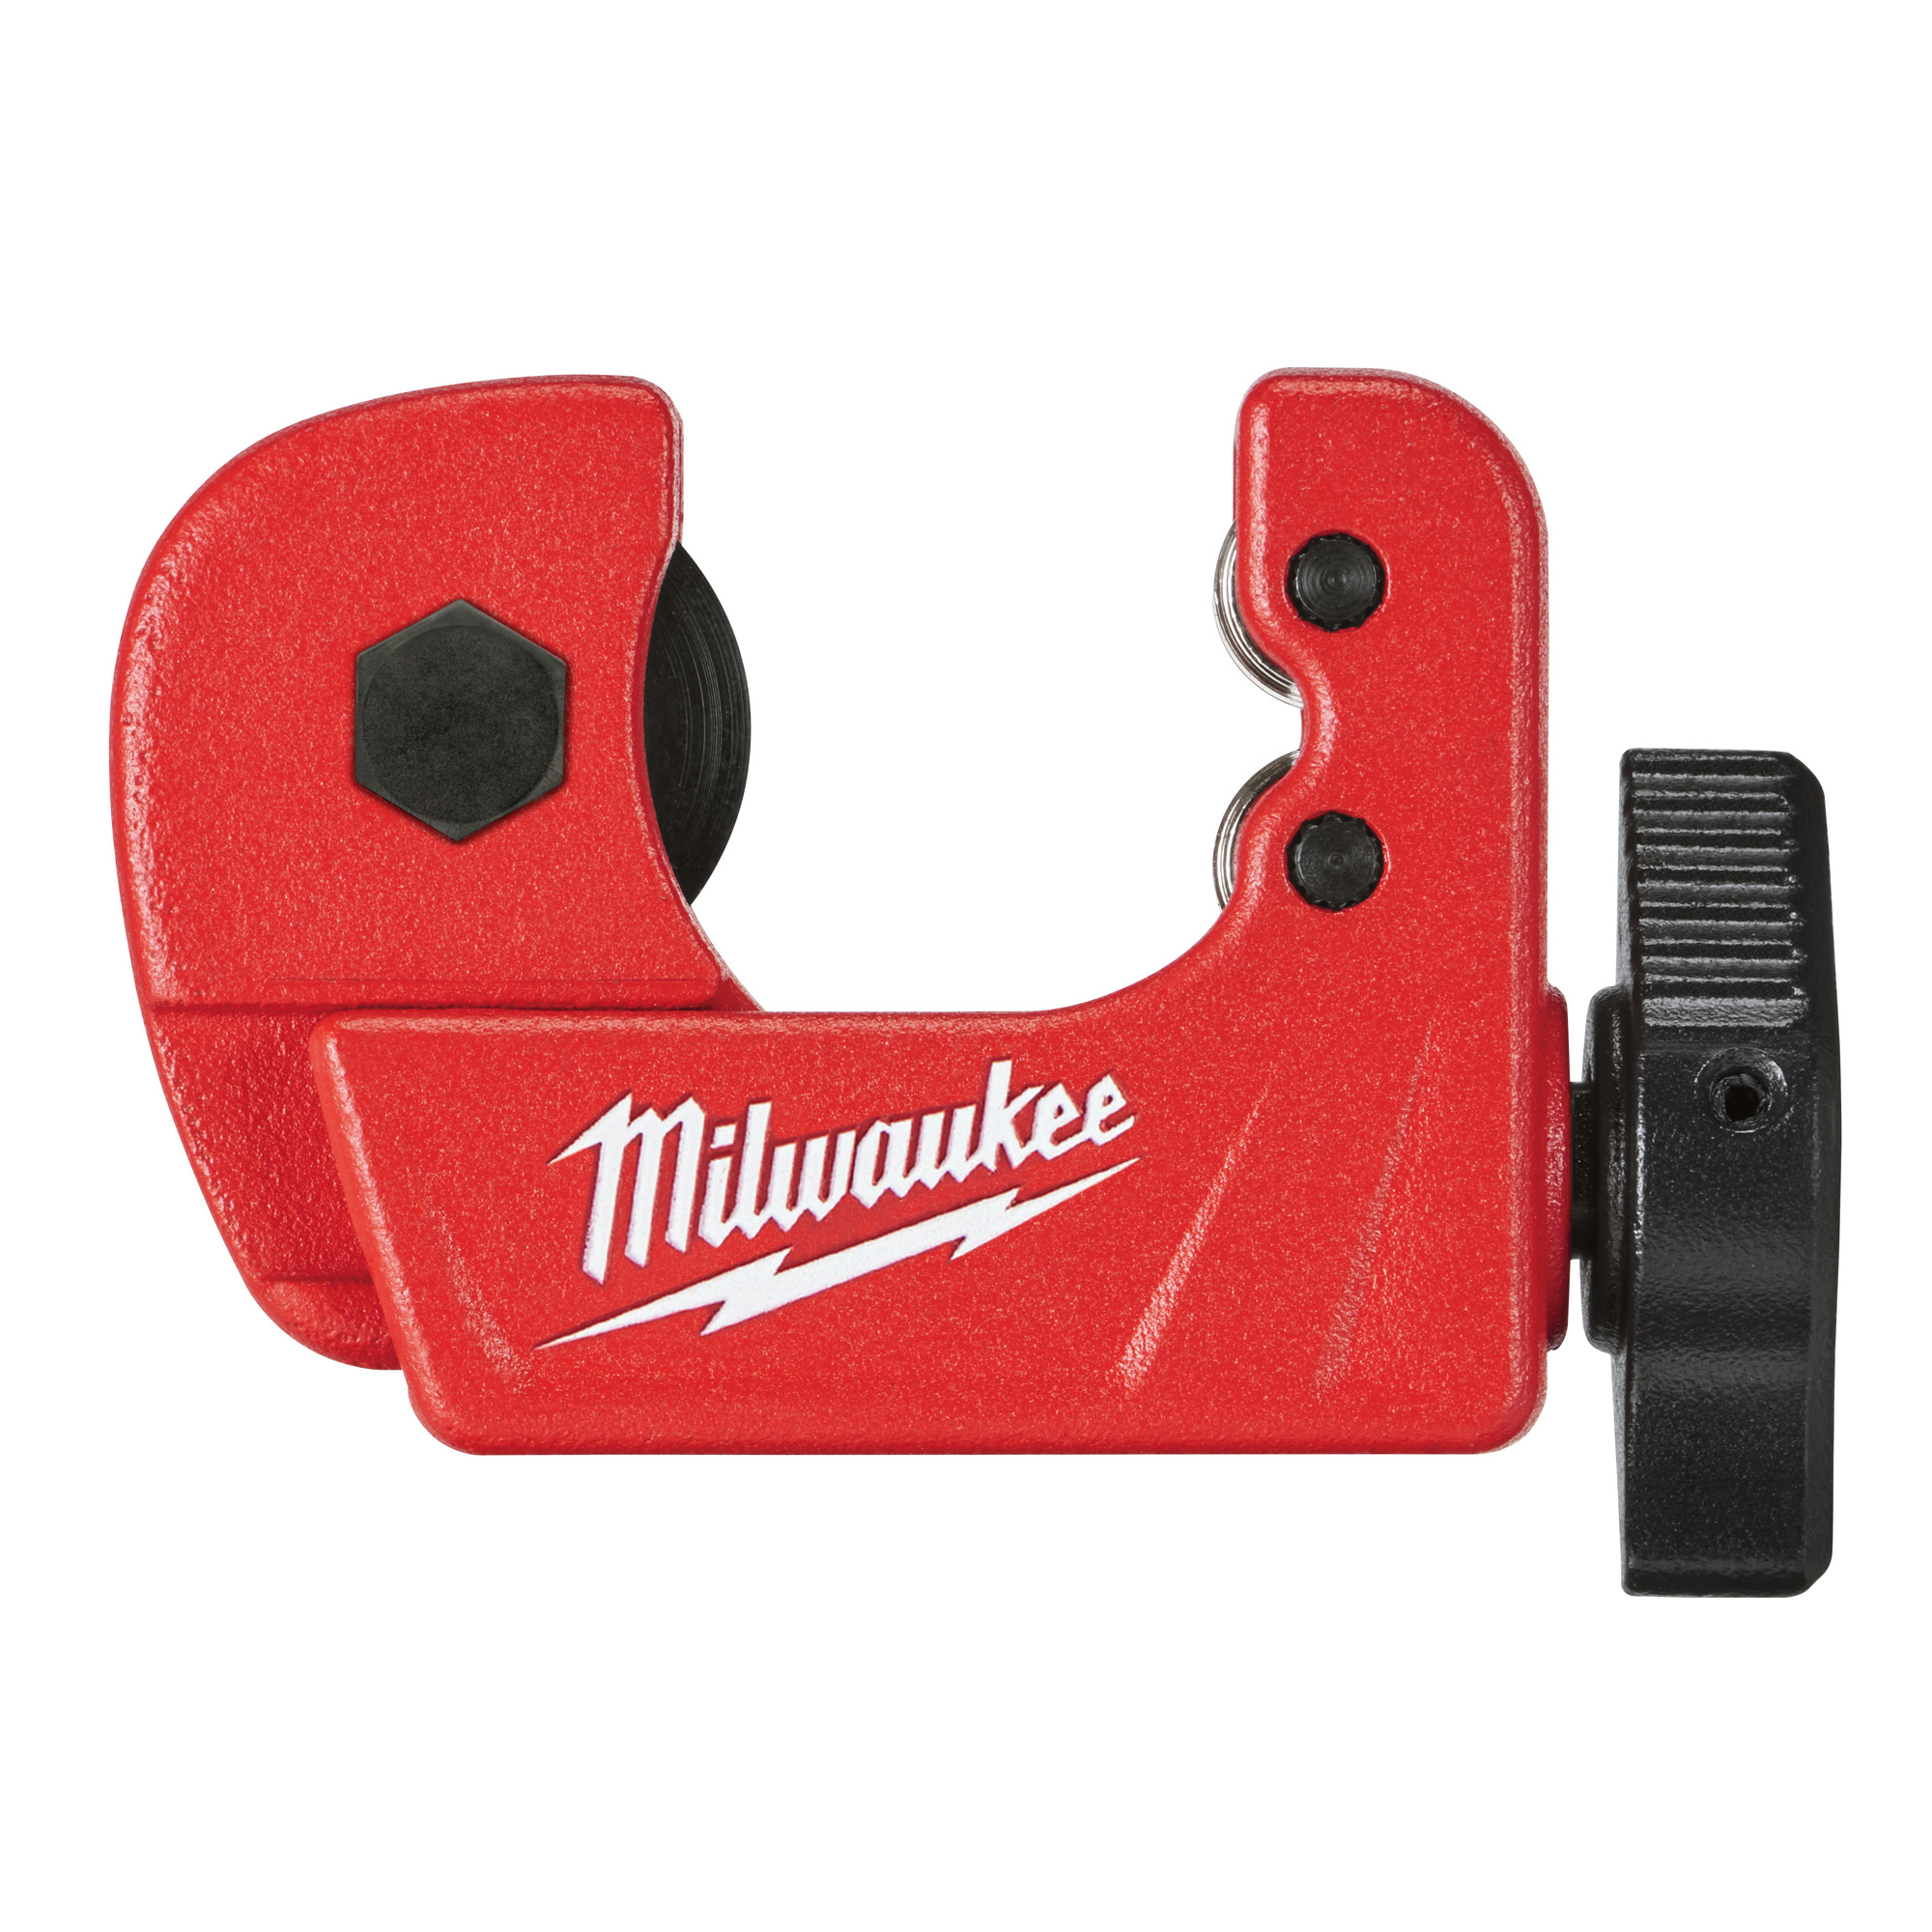 Milwaukee, 1/2Inch Mini Copper Tubing Cutter, Max. Diameter 0.63 in, Blade Material Carbon Steel, Length 4.8 in, Model 48-22-4250